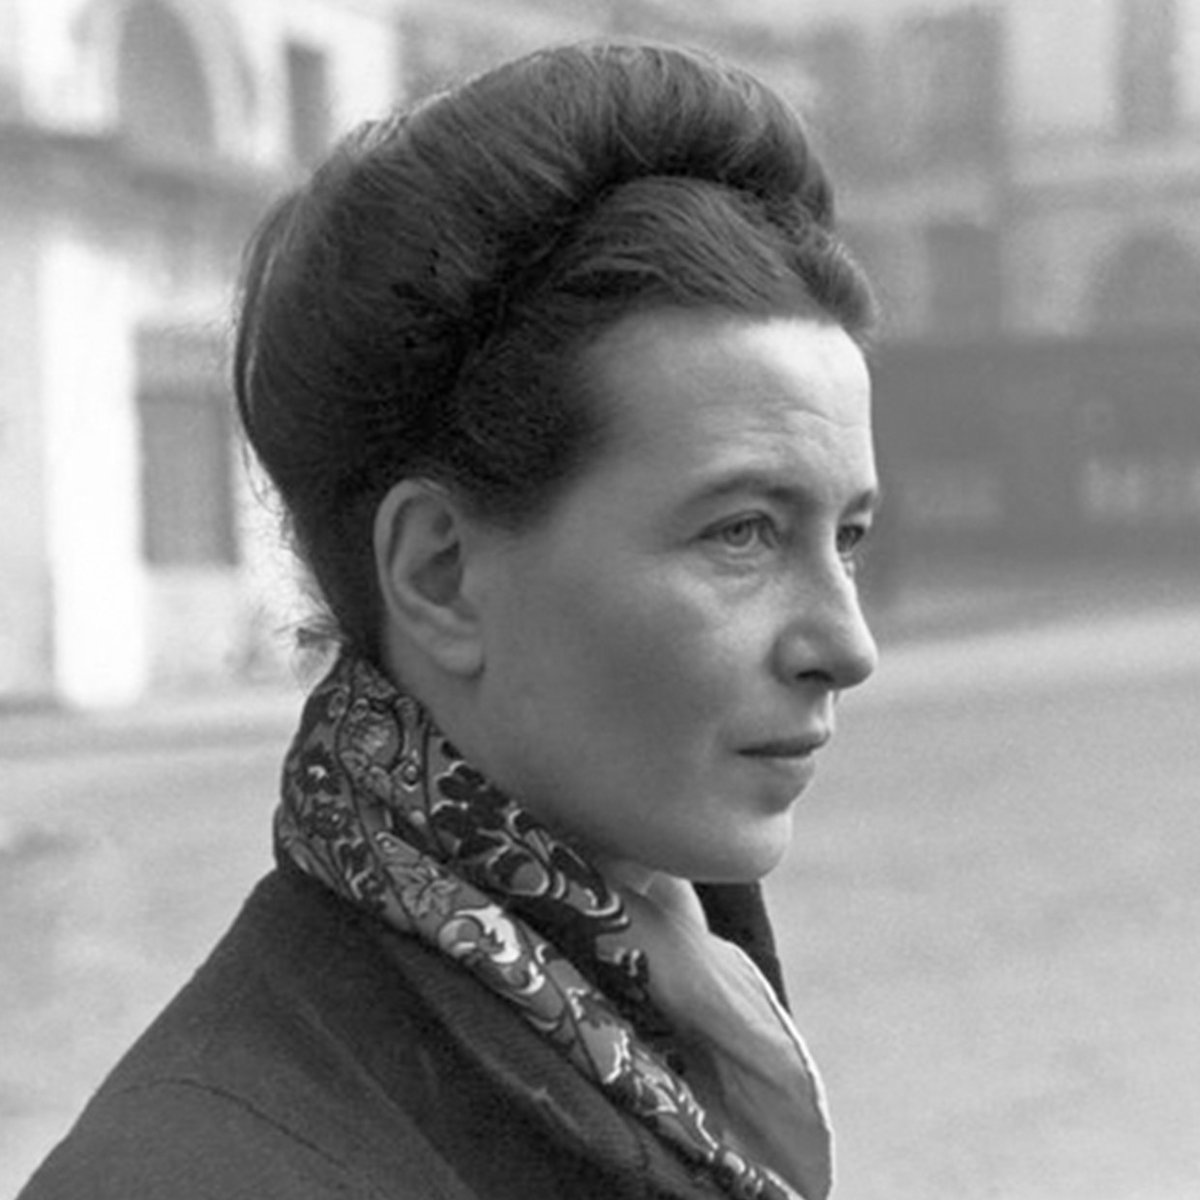 📢ANNOUNCEMENT KLAXON Our next BookTalk will be on Simone deBeauvoir's classic, Prix Goncourt-winning novel THE MANDARINS, which celebrates its 70th birthday this year Fittingly enough, we're doing this one in a cafe. See you at Little Man Coffee on 4 June